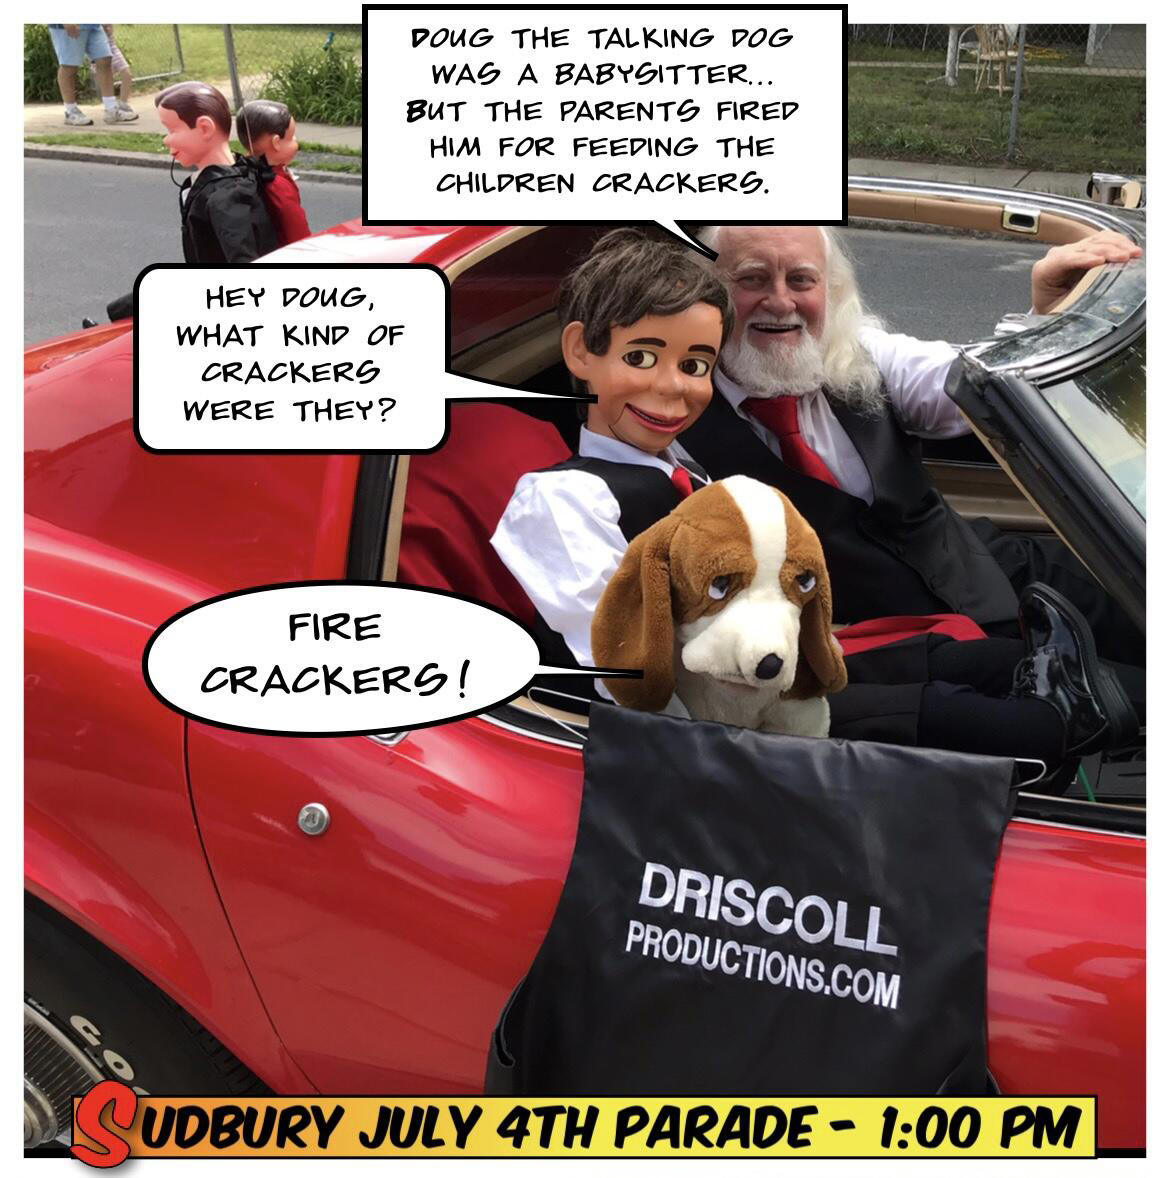 We're honored to be back again in the Sudbury July 4th parade